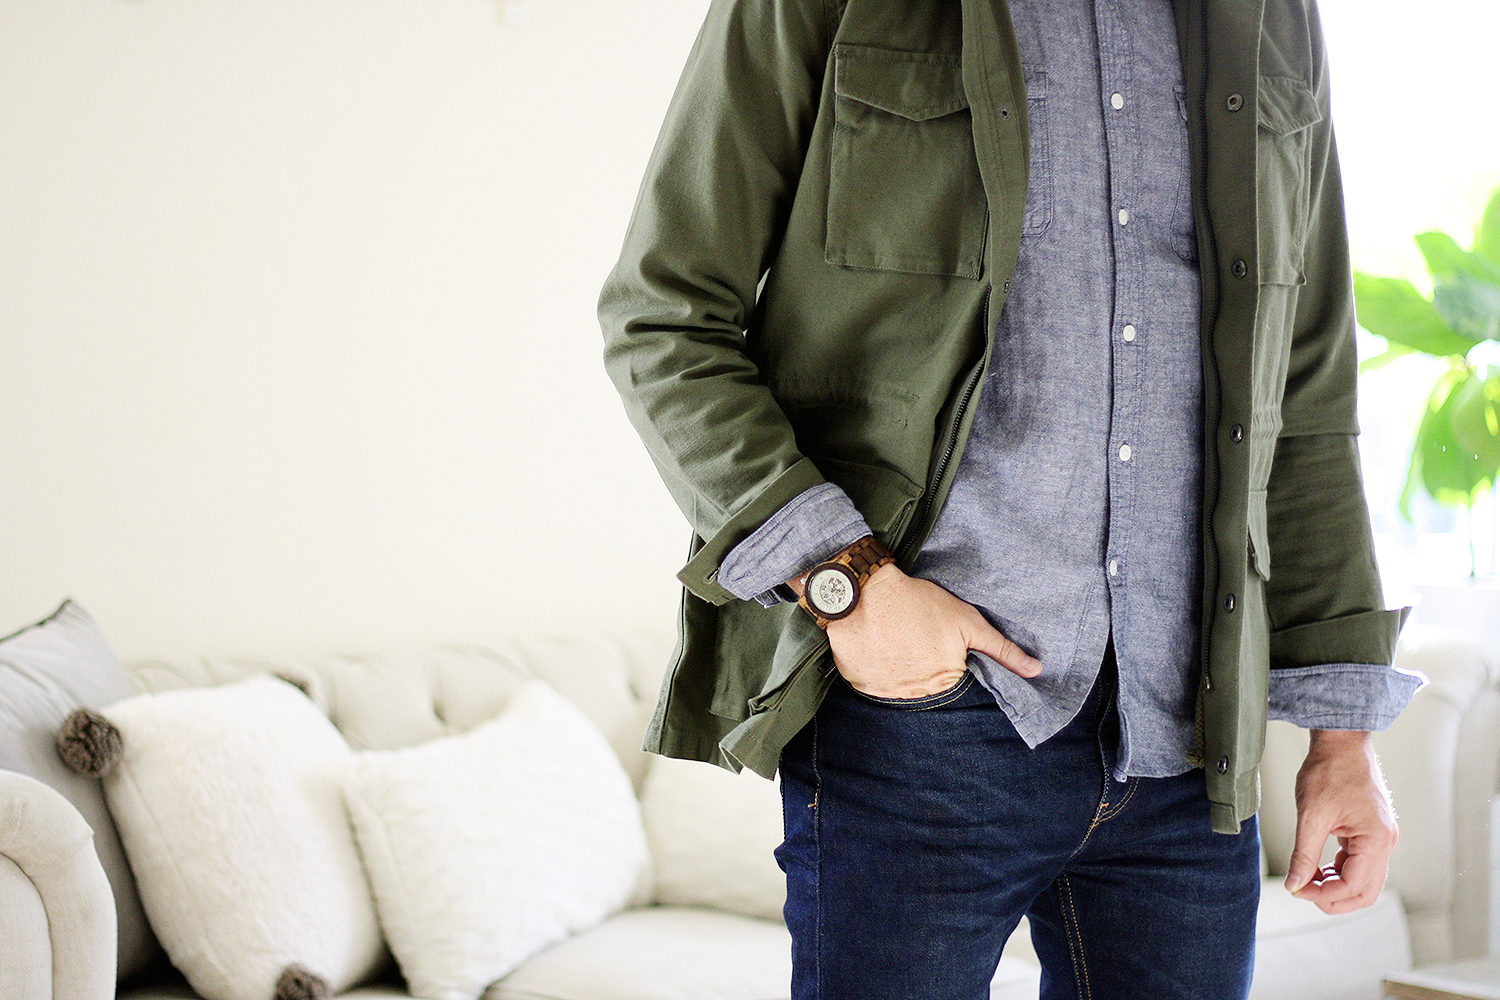 Men's Winter Style | Layer & Accessories | by Ashlee Proffitt